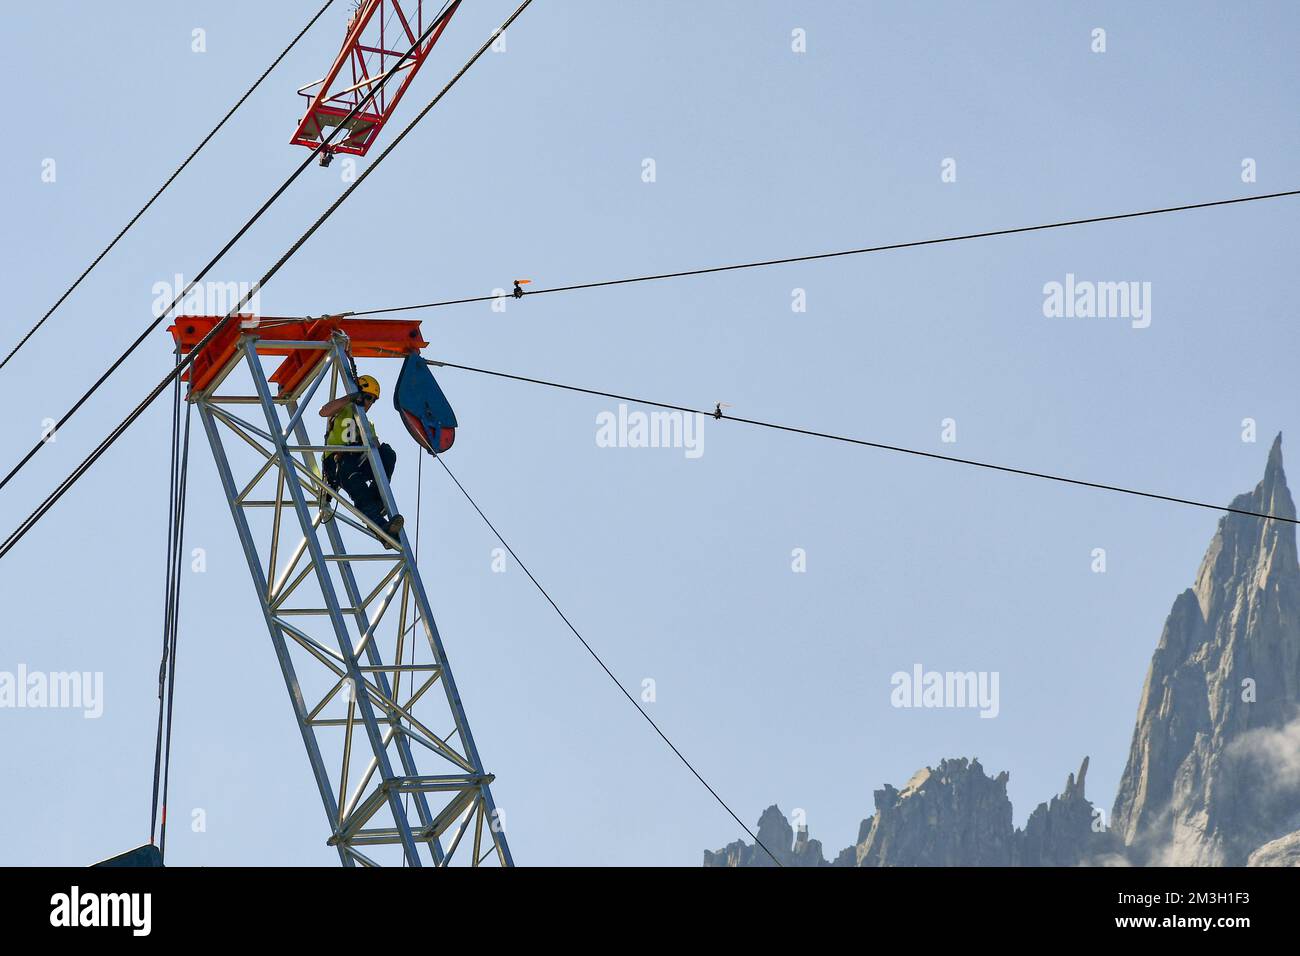 A worker on the top of a crane at the Montenvers station for the construction of the new Mer de Glace (Sea of Ice glacier) gondola lift, Chamonix Stock Photo